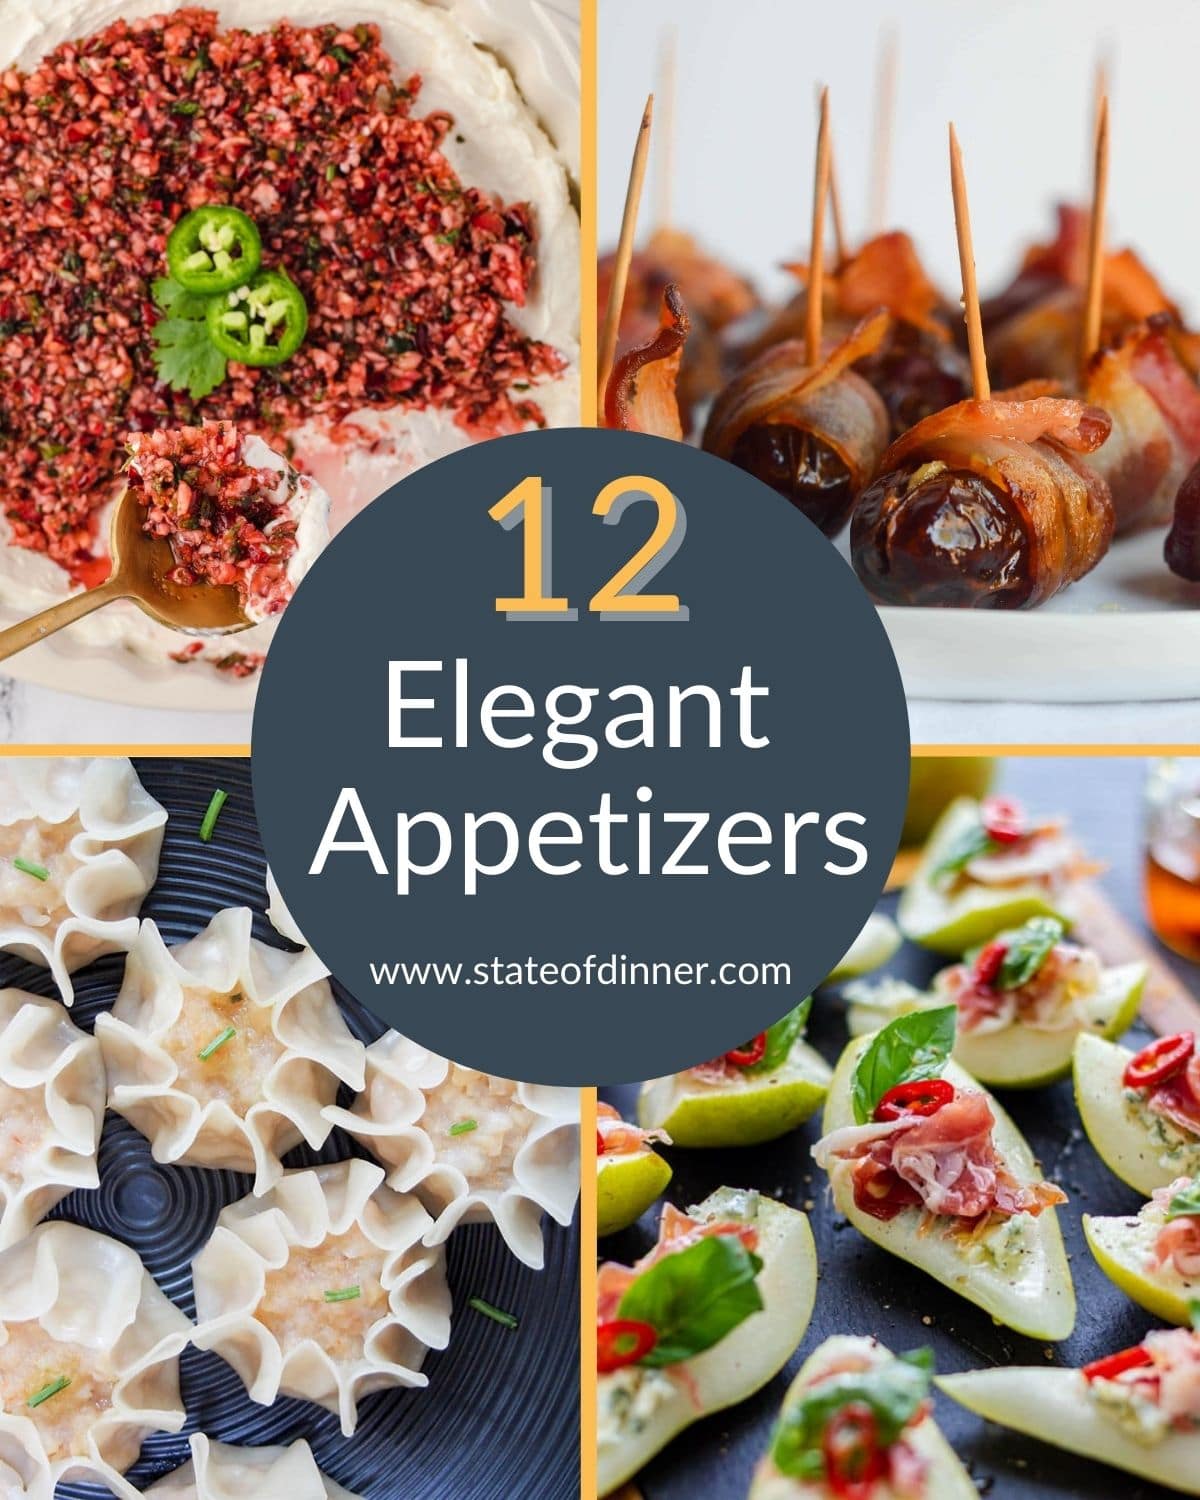 Collage with 4 appetizers and the words "12 elegant appetizers."